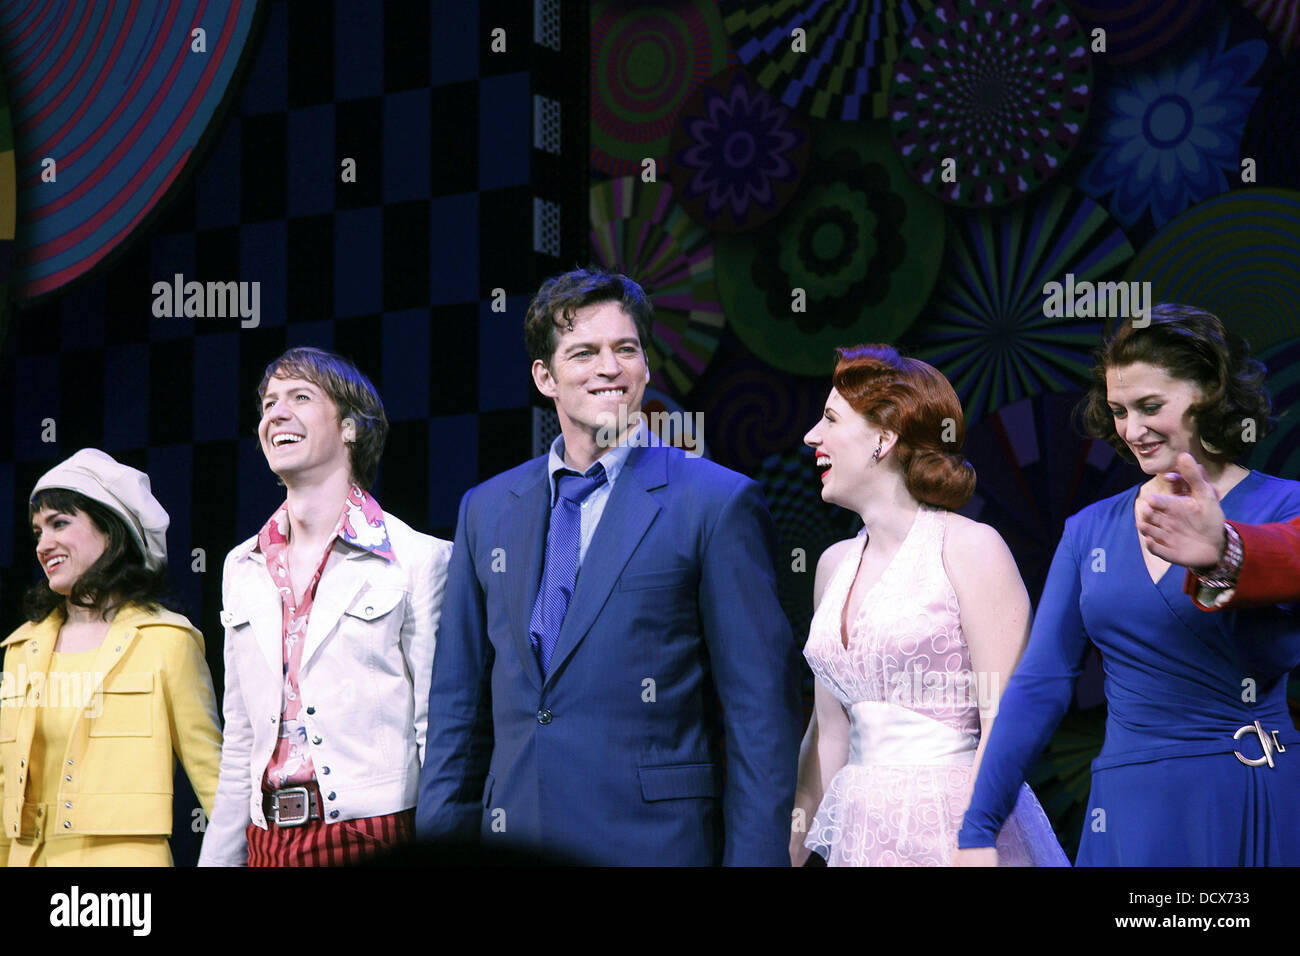 Sarah Stiles, David Turner, Harry Connick, Jr., Jessie Mueller and Kerry O'Malley  Opening night of the Broadway musical production of 'On A Clear Day You Can See Forever' at the St. James Theatre - Curtain Call.  New York City, USA - 11.12.11 Stock Photo